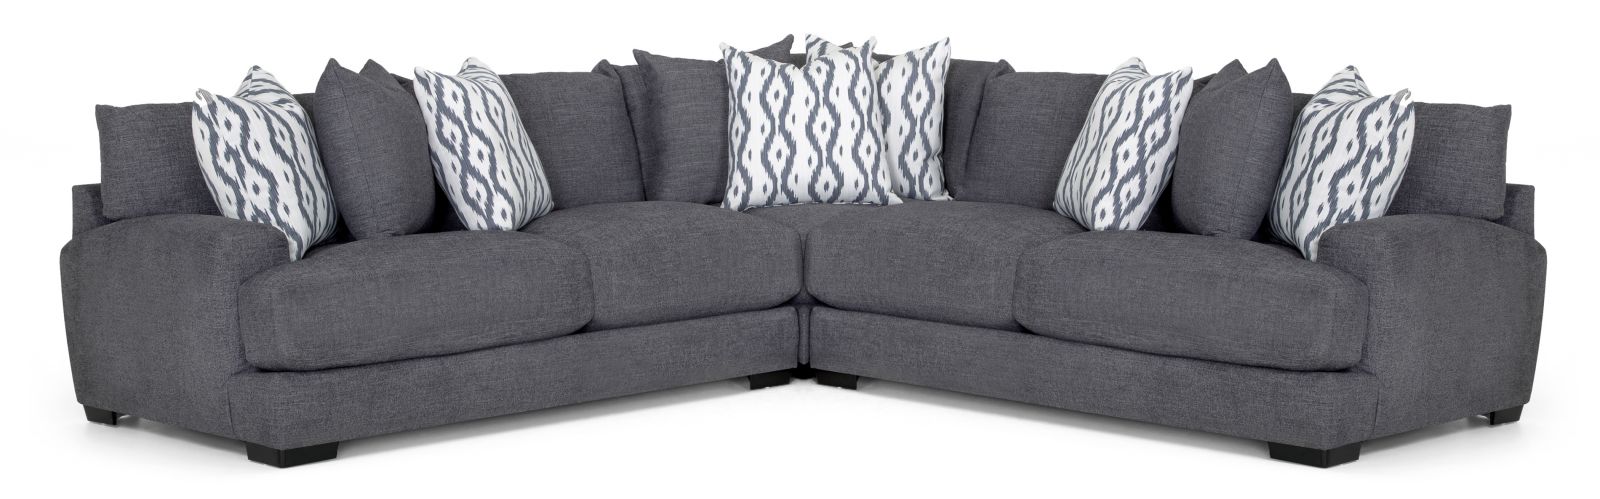 Journey 3 Piece Sectional